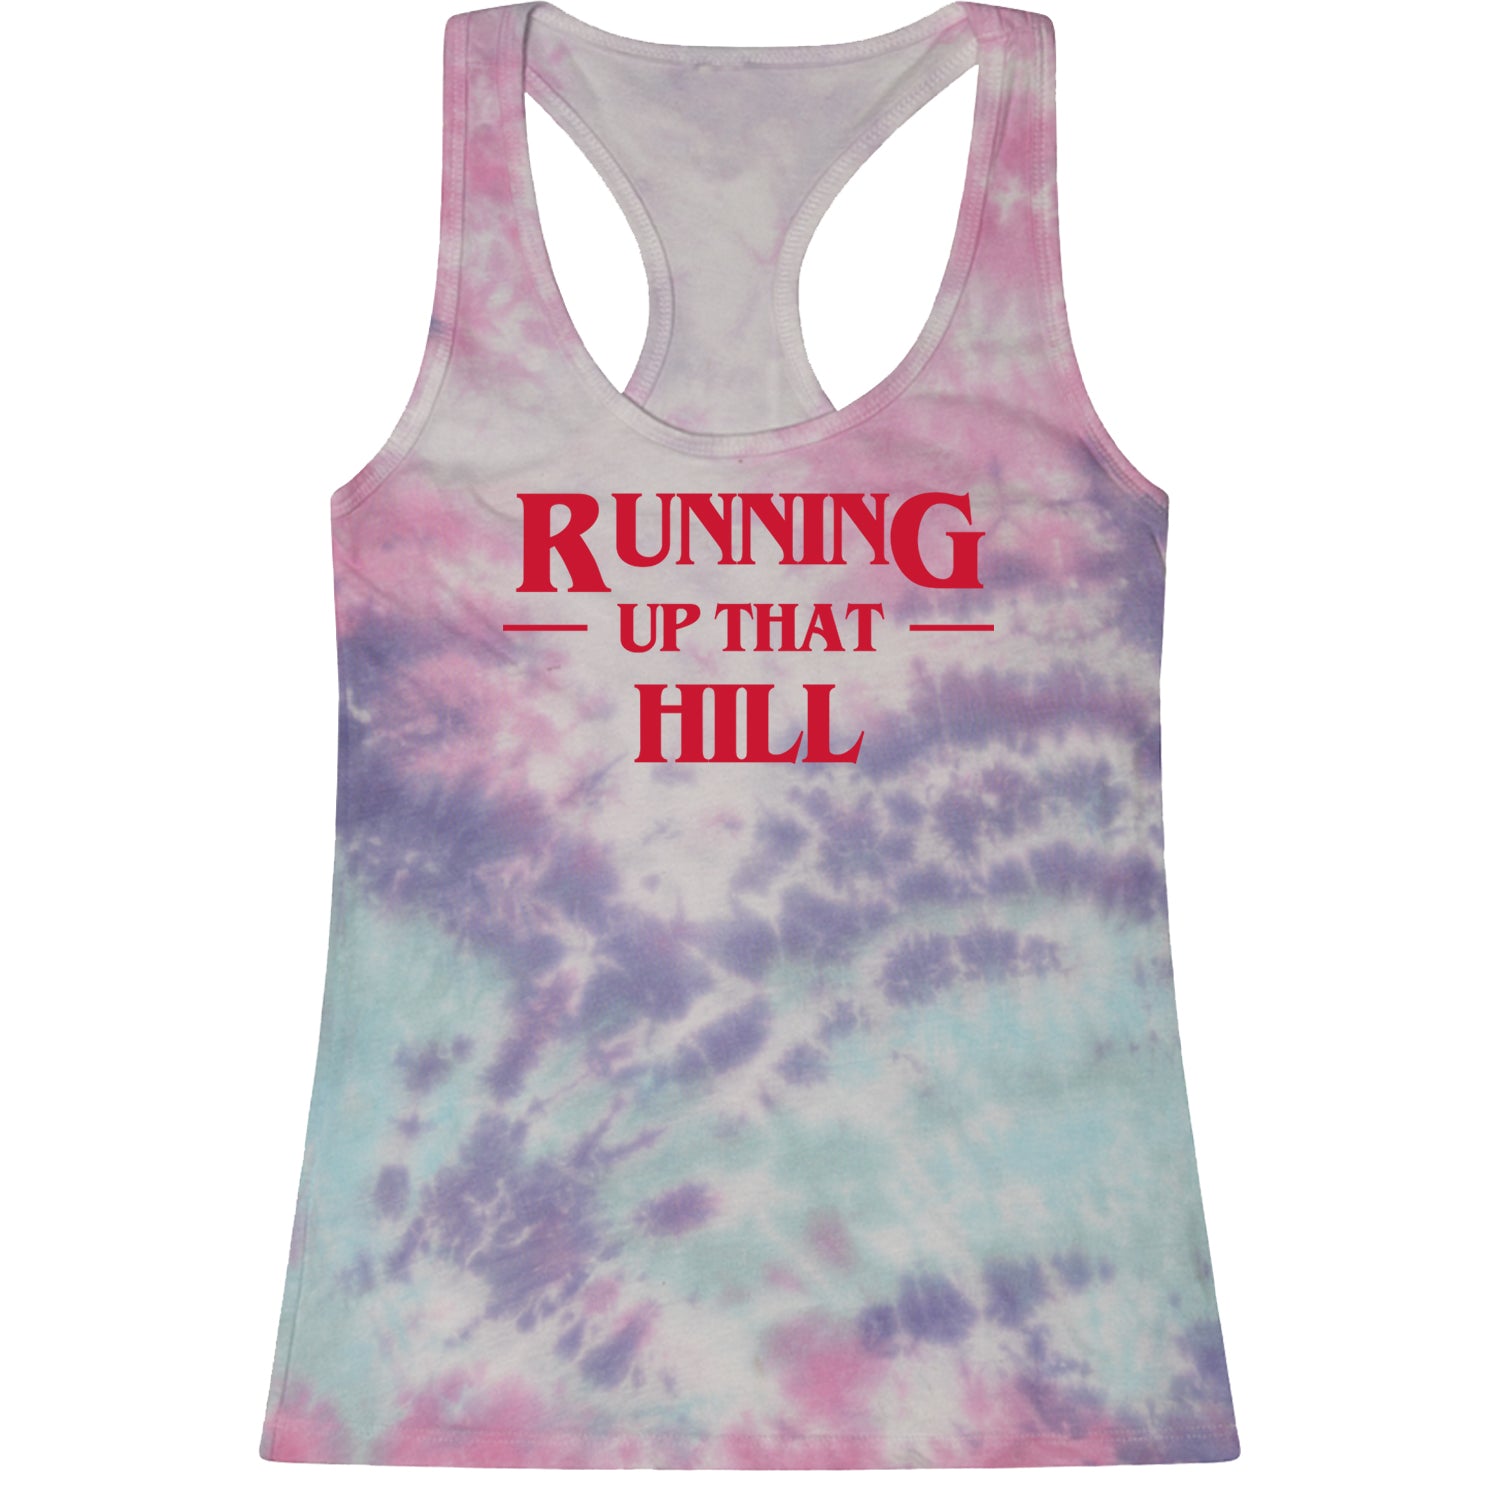 Running Up That Hill Racerback Tank Top for Women 4, don’t, eleven, four, friends, lie, season by Expression Tees